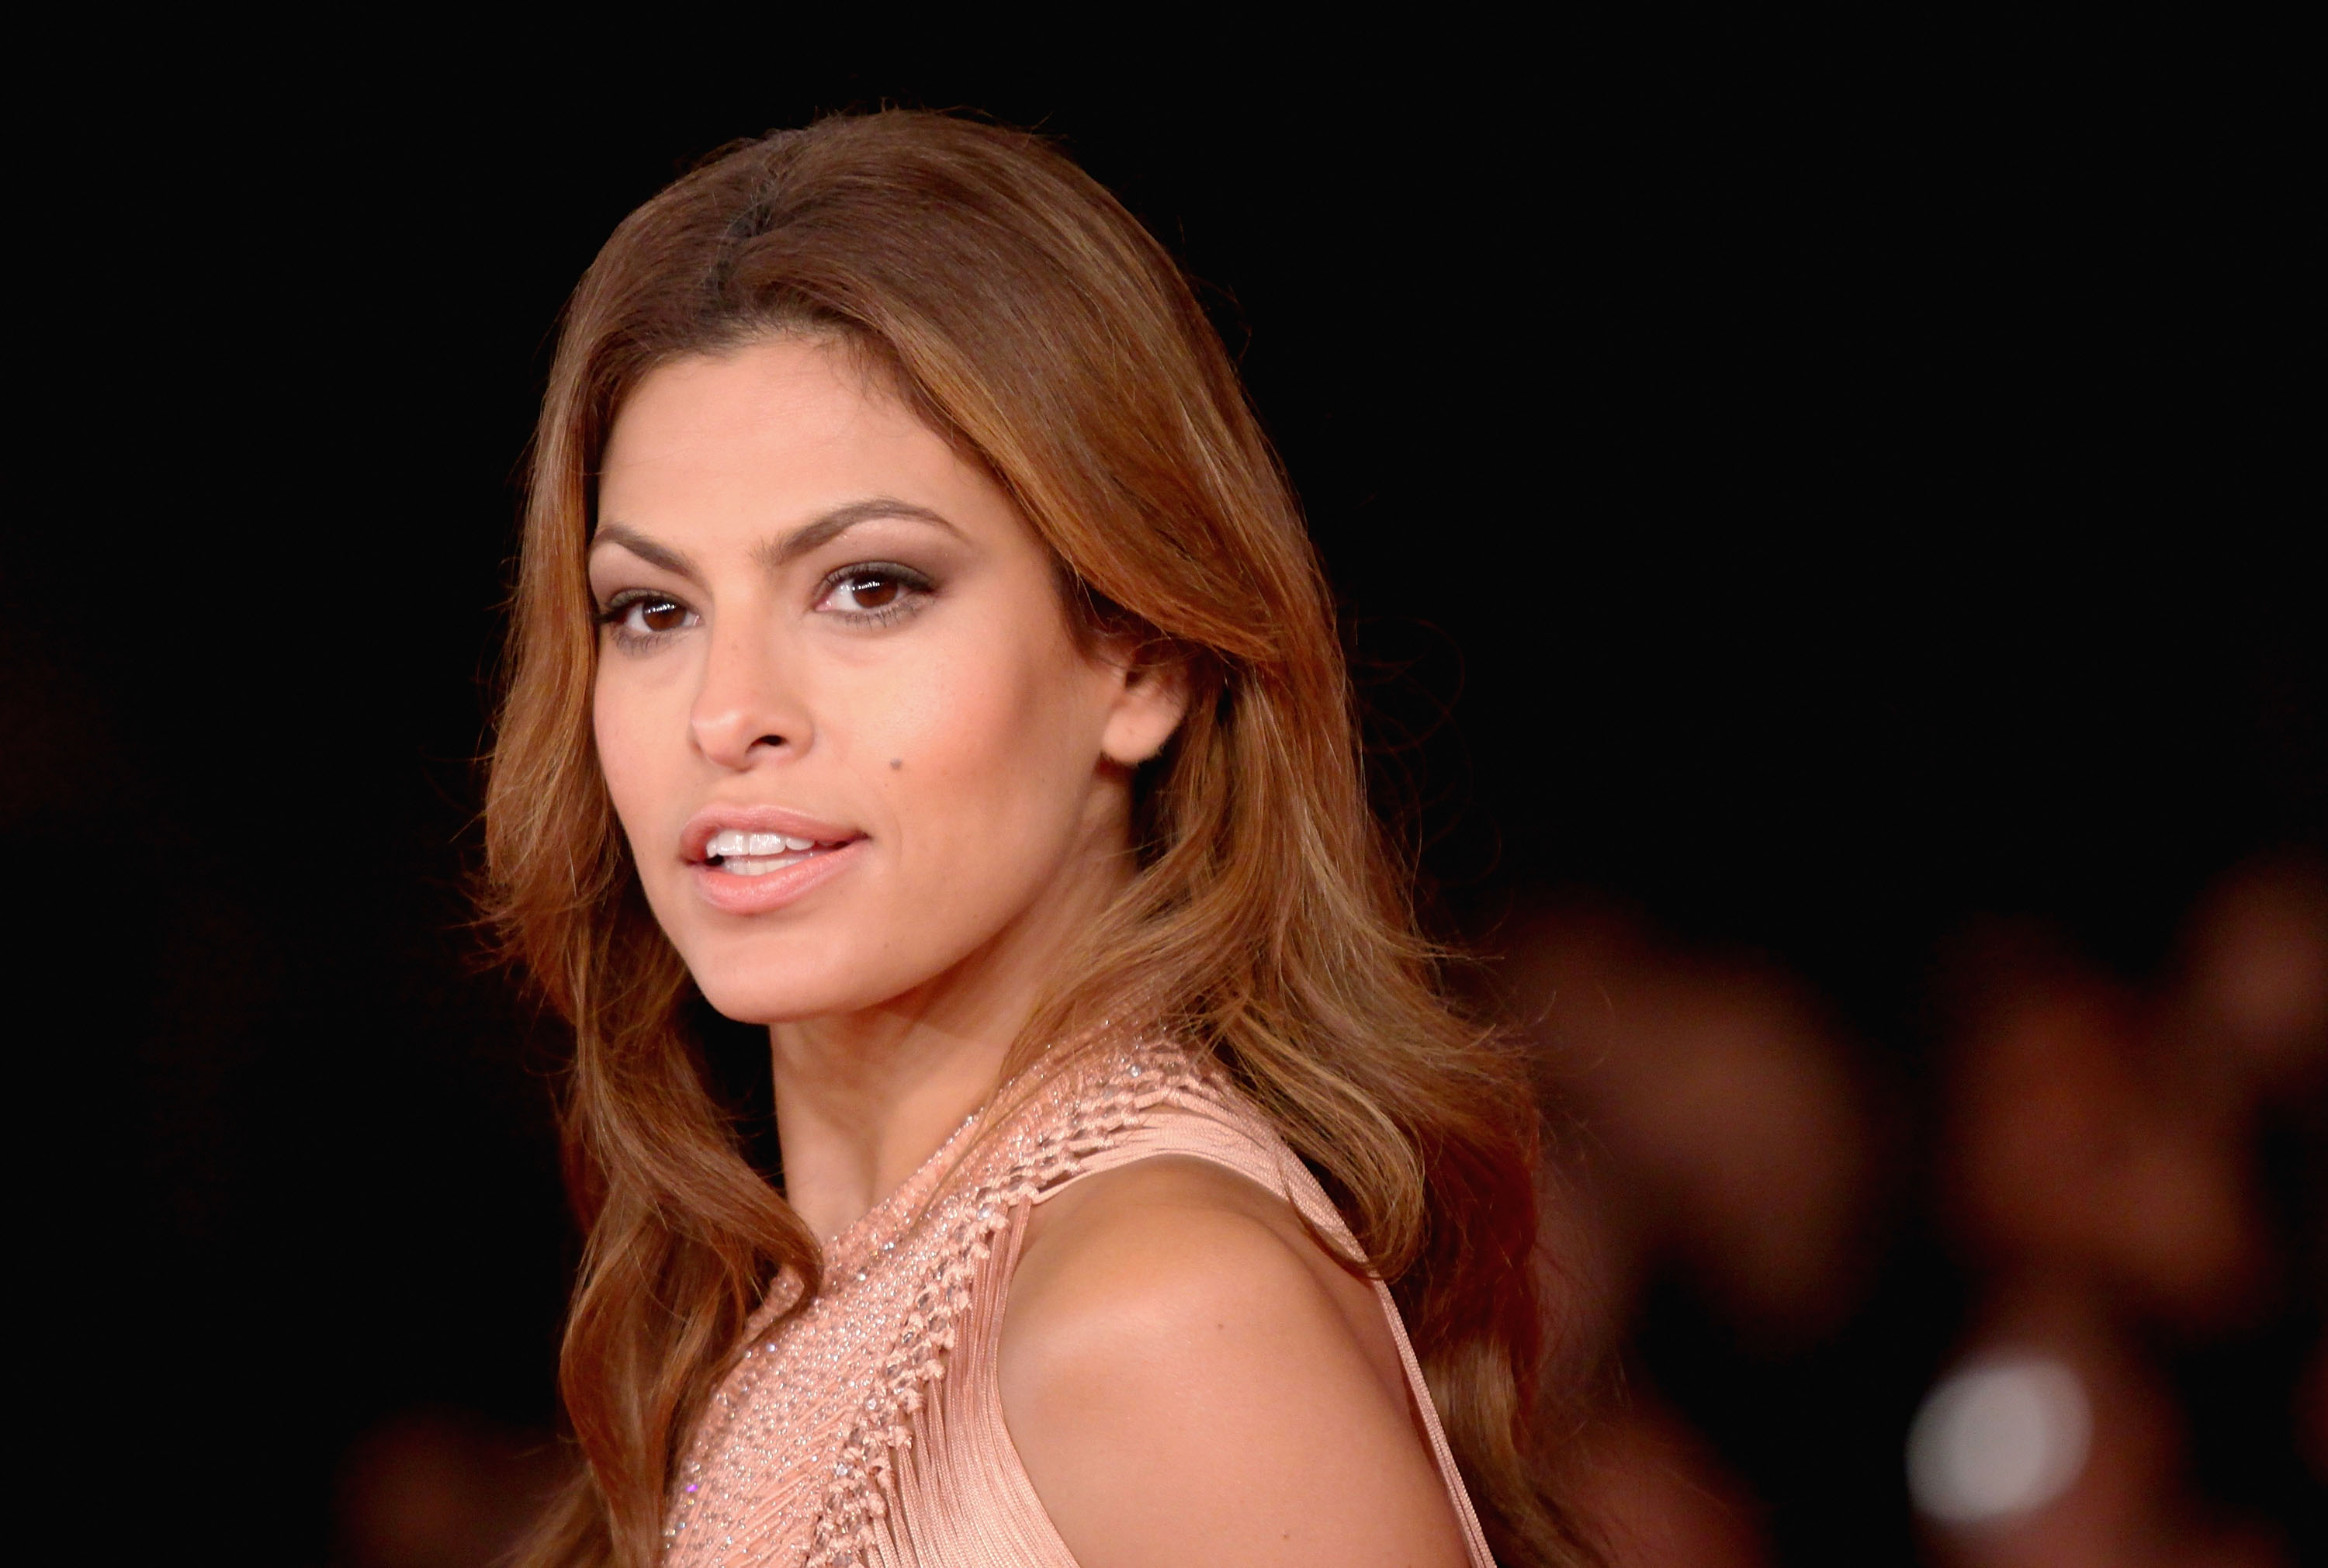 ROME - OCTOBER 29:  Actress Eva Mendes attends the "Little White Lies" premiere during The 5th International Rome Film Festival at Auditorium Parco Della Musica on October 29, 2010 in Rome, Italy.  (Photo by Ernesto Ruscio/Getty Images) (Ernesto Ruscio—Getty Images)